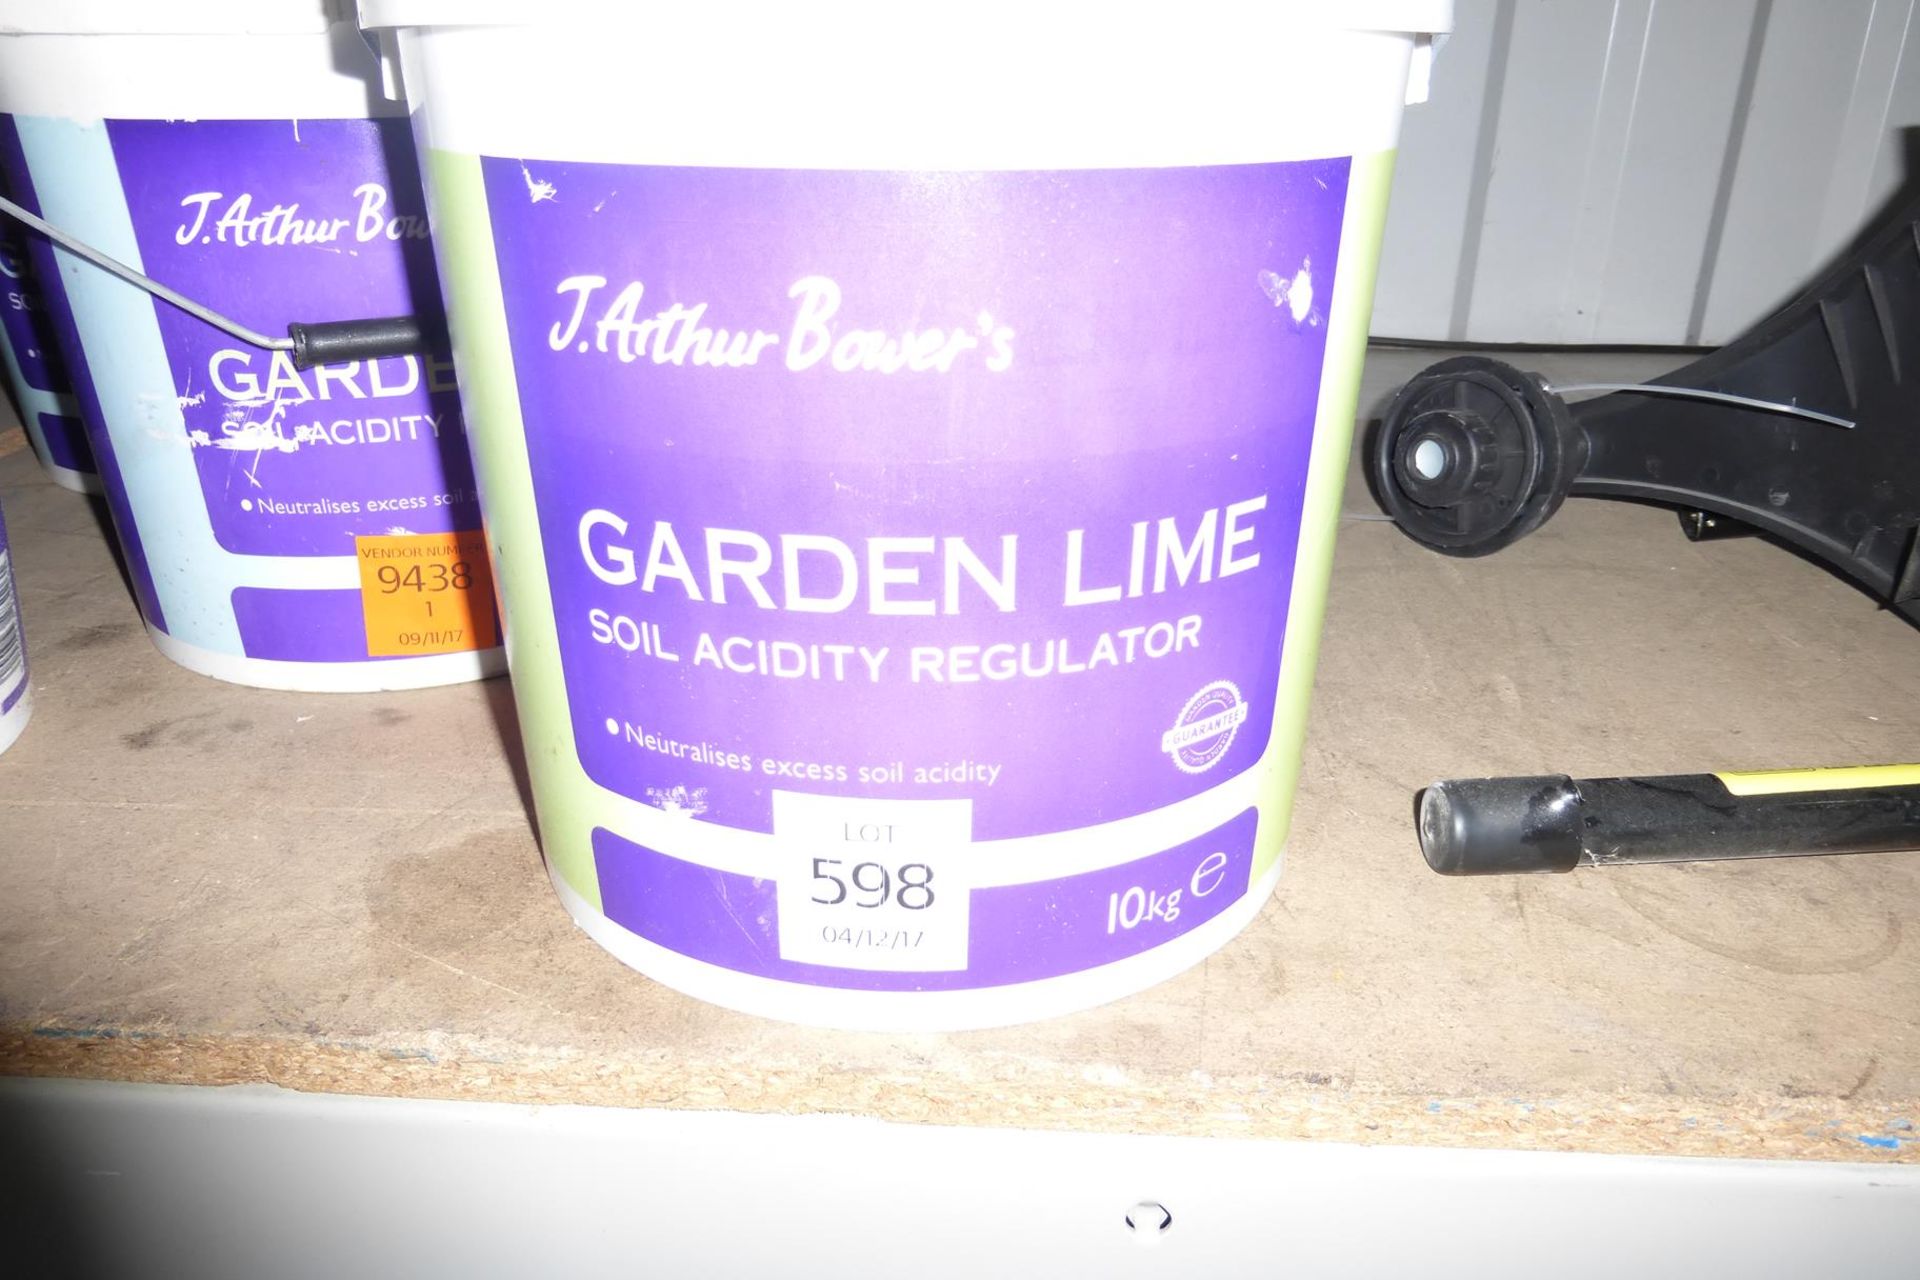 5 x Tubs of J, Arthur Bowers Garden Lime - Image 2 of 2